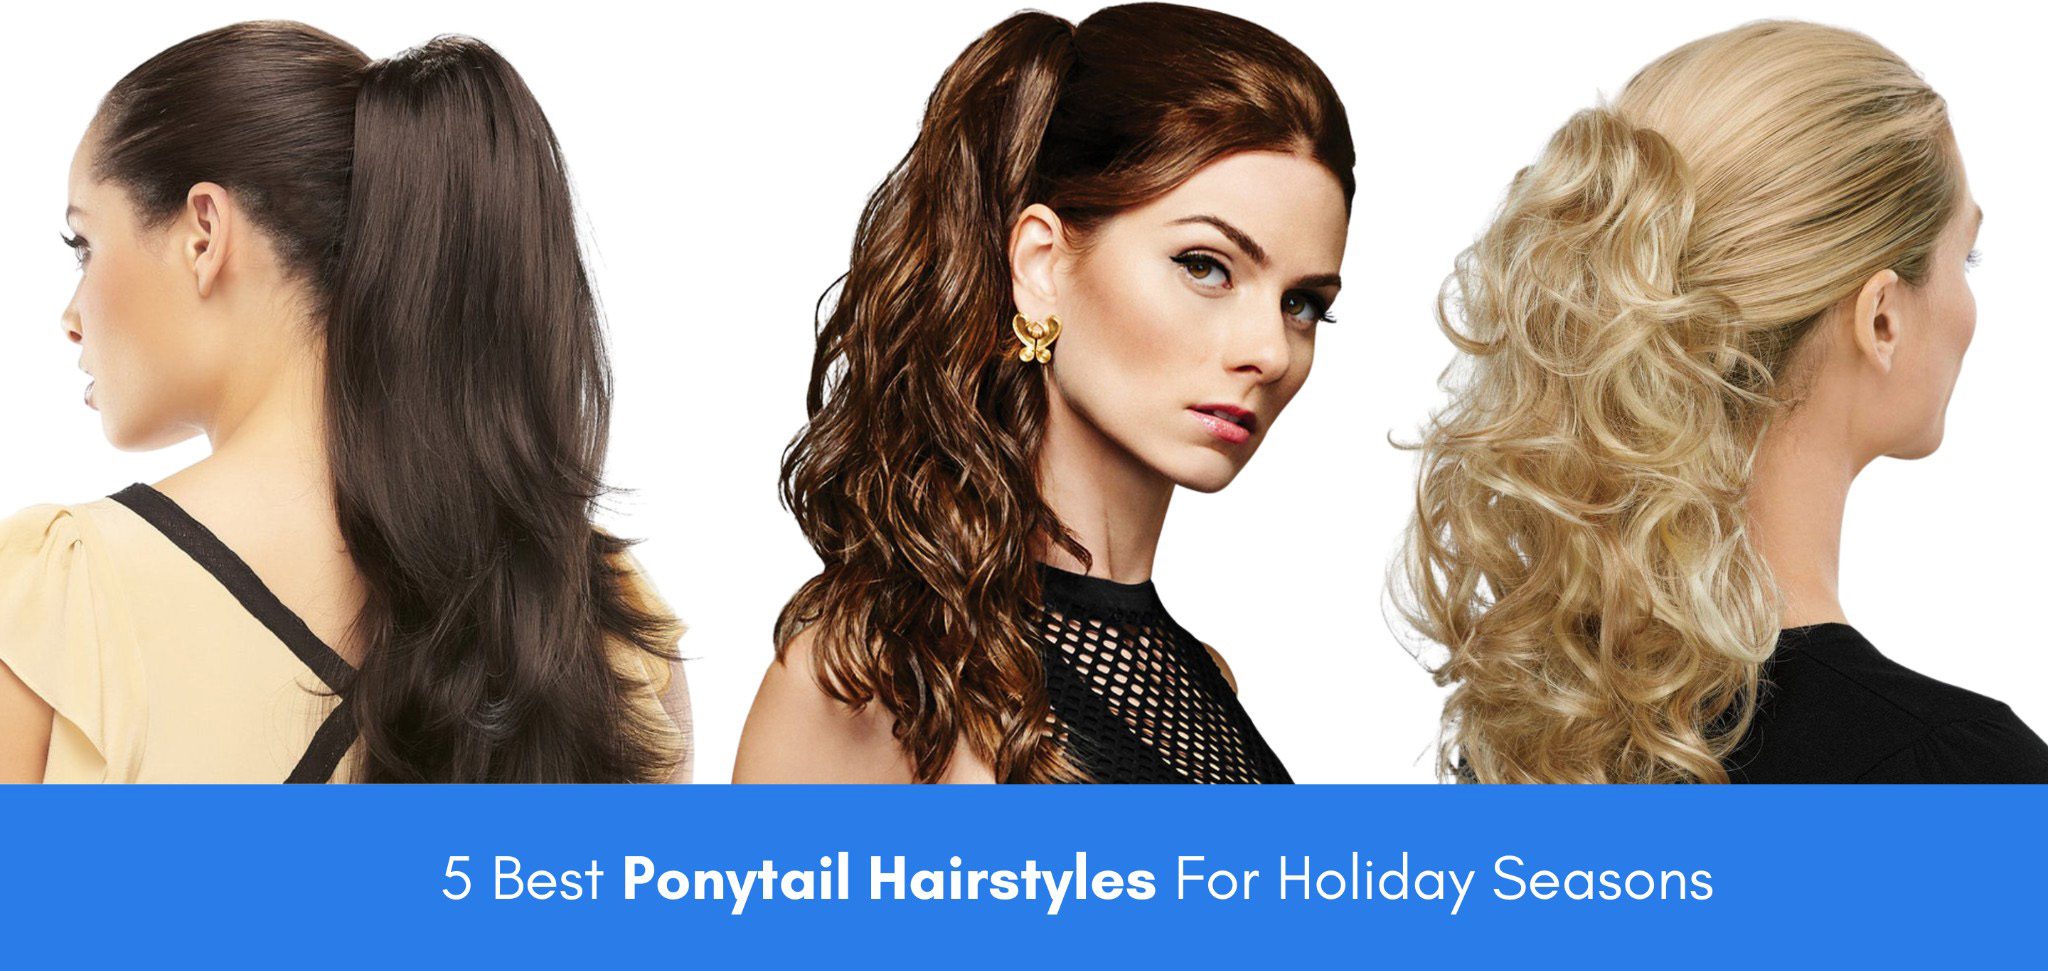 5 Best Ponytail Hairstyles For Holiday Seasons 